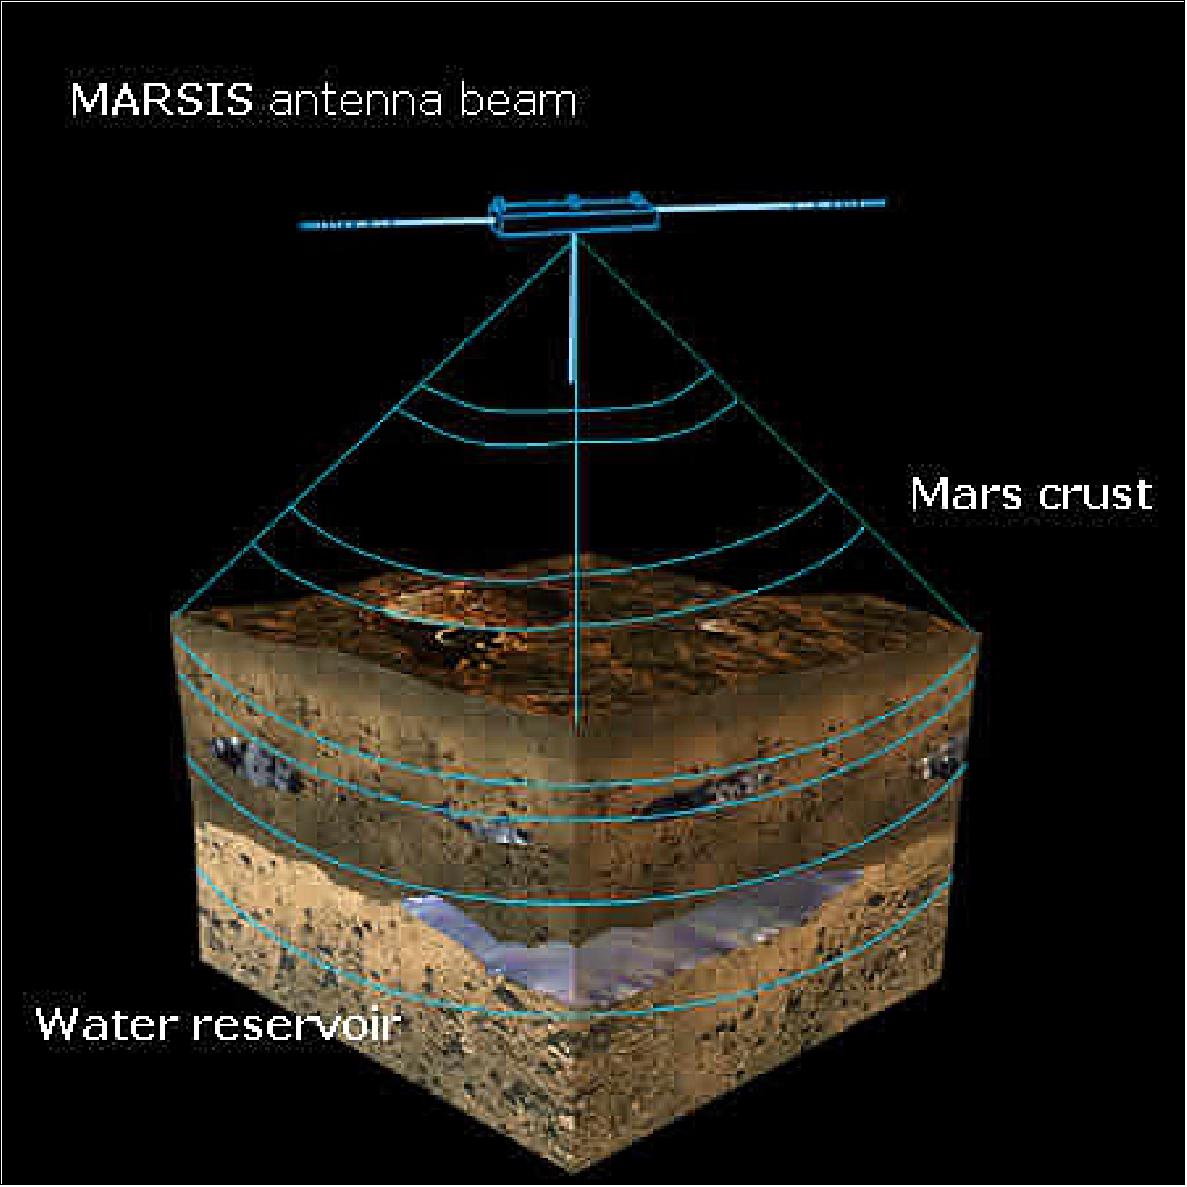 Figure 86: MARSIS prospecting for water (image credit: ESA)